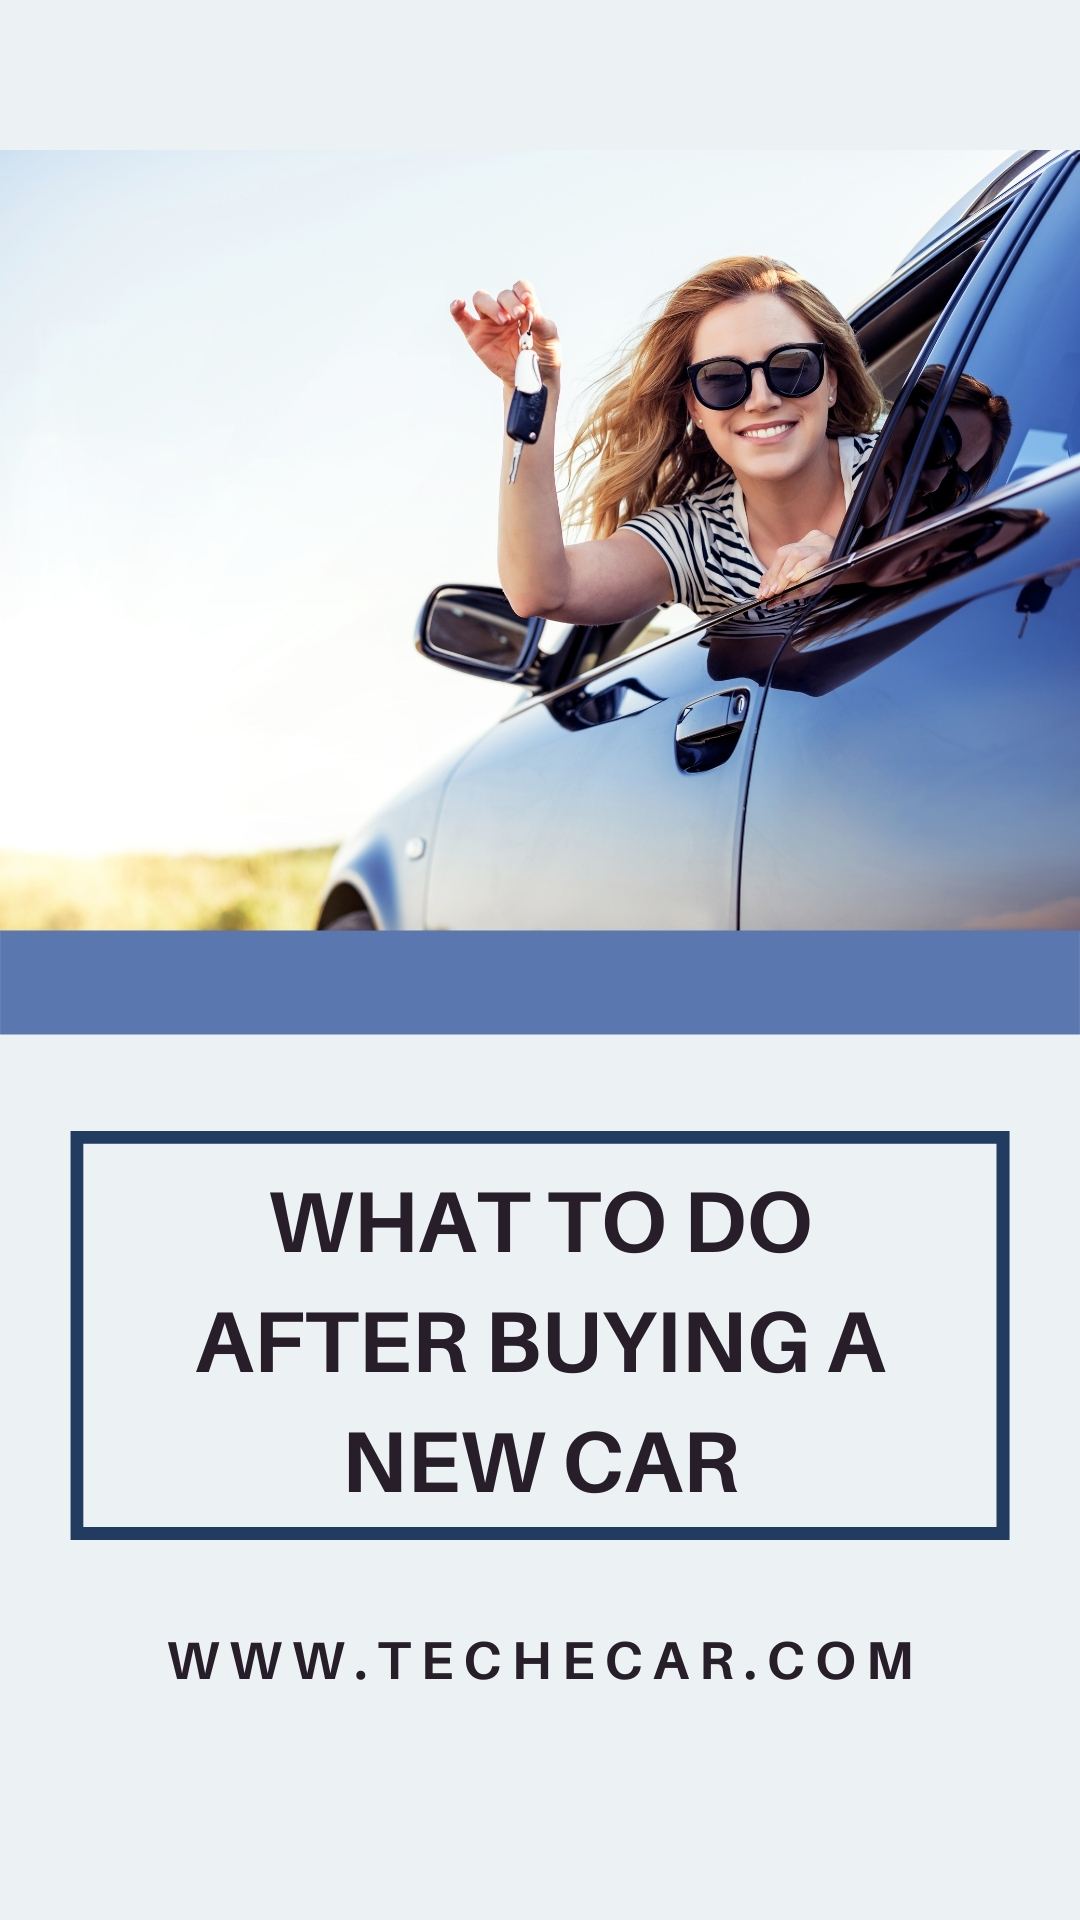 What To Do After Buying A New Car